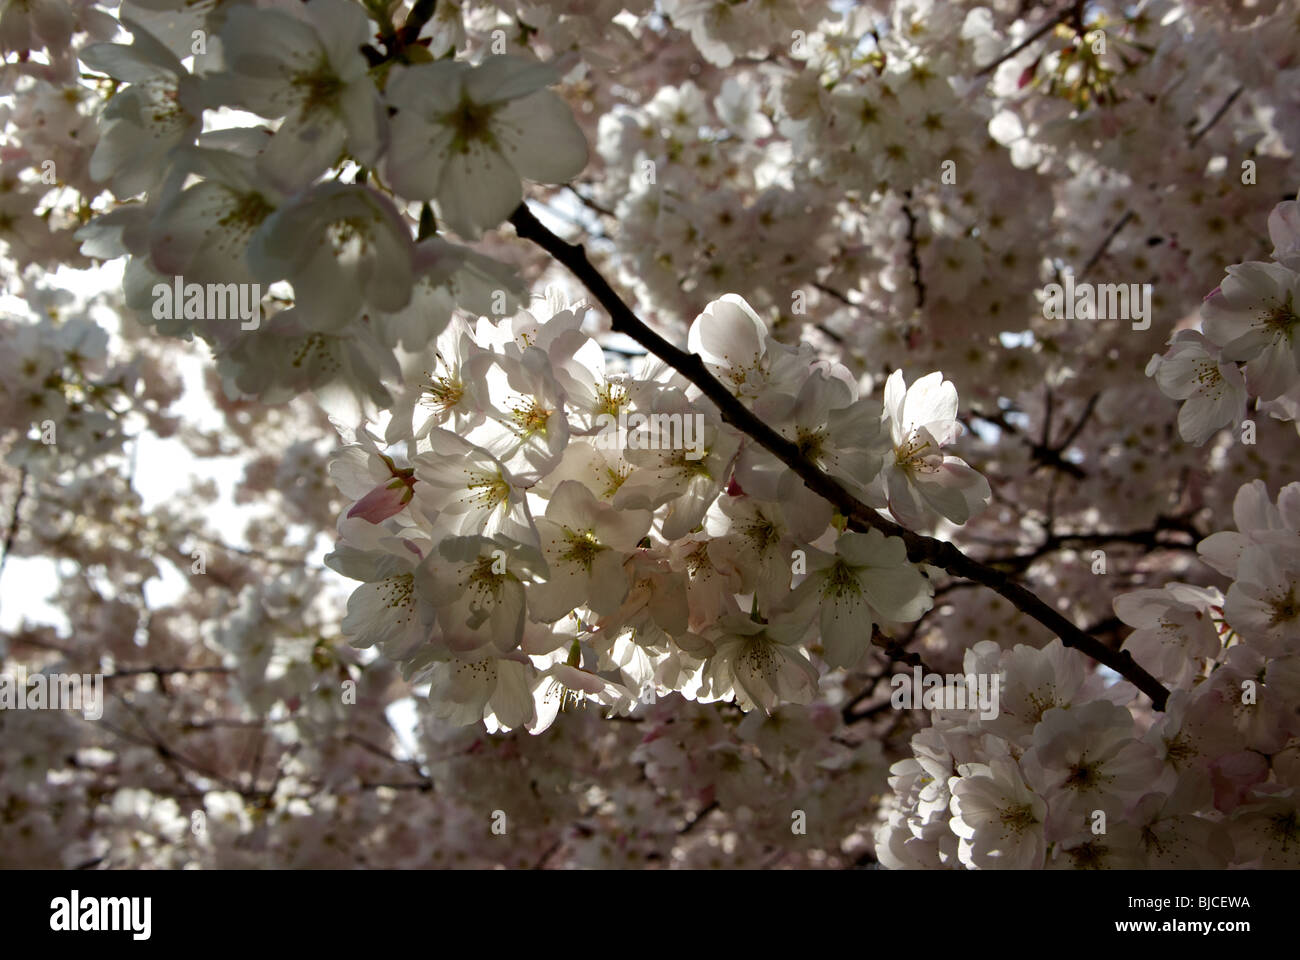 Delicate profusion of pink tinged white Japanese cherry blossoms in a dense overhead canopy of blooms Stock Photo